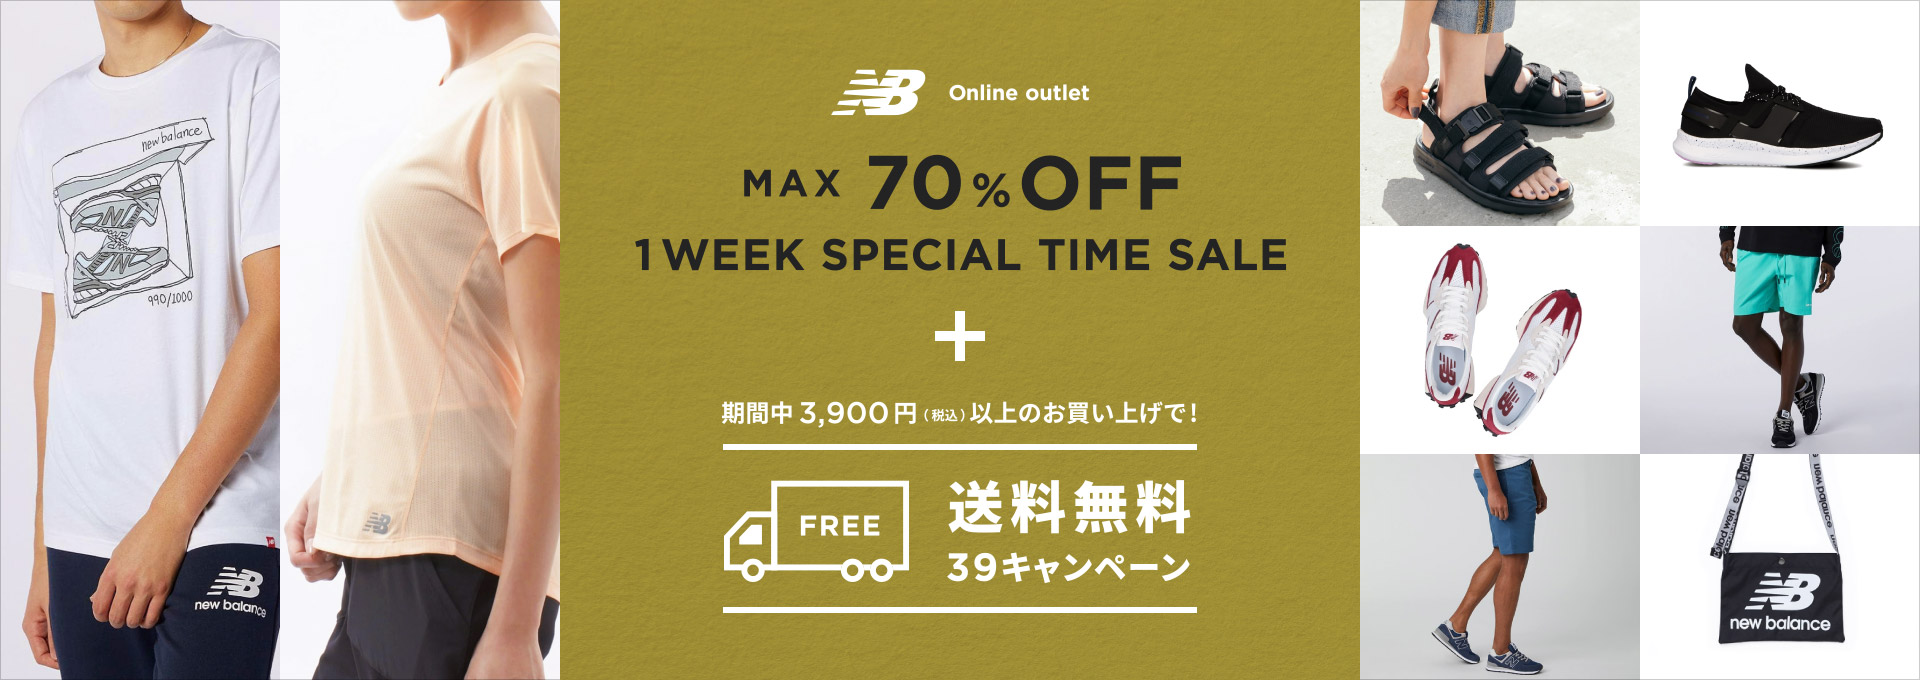 NB Online outlet Max 70% Off 1 Week Special Time Sale. 期間中3,900円(税込)以上のお買い上げで送料無料キャンペーン.